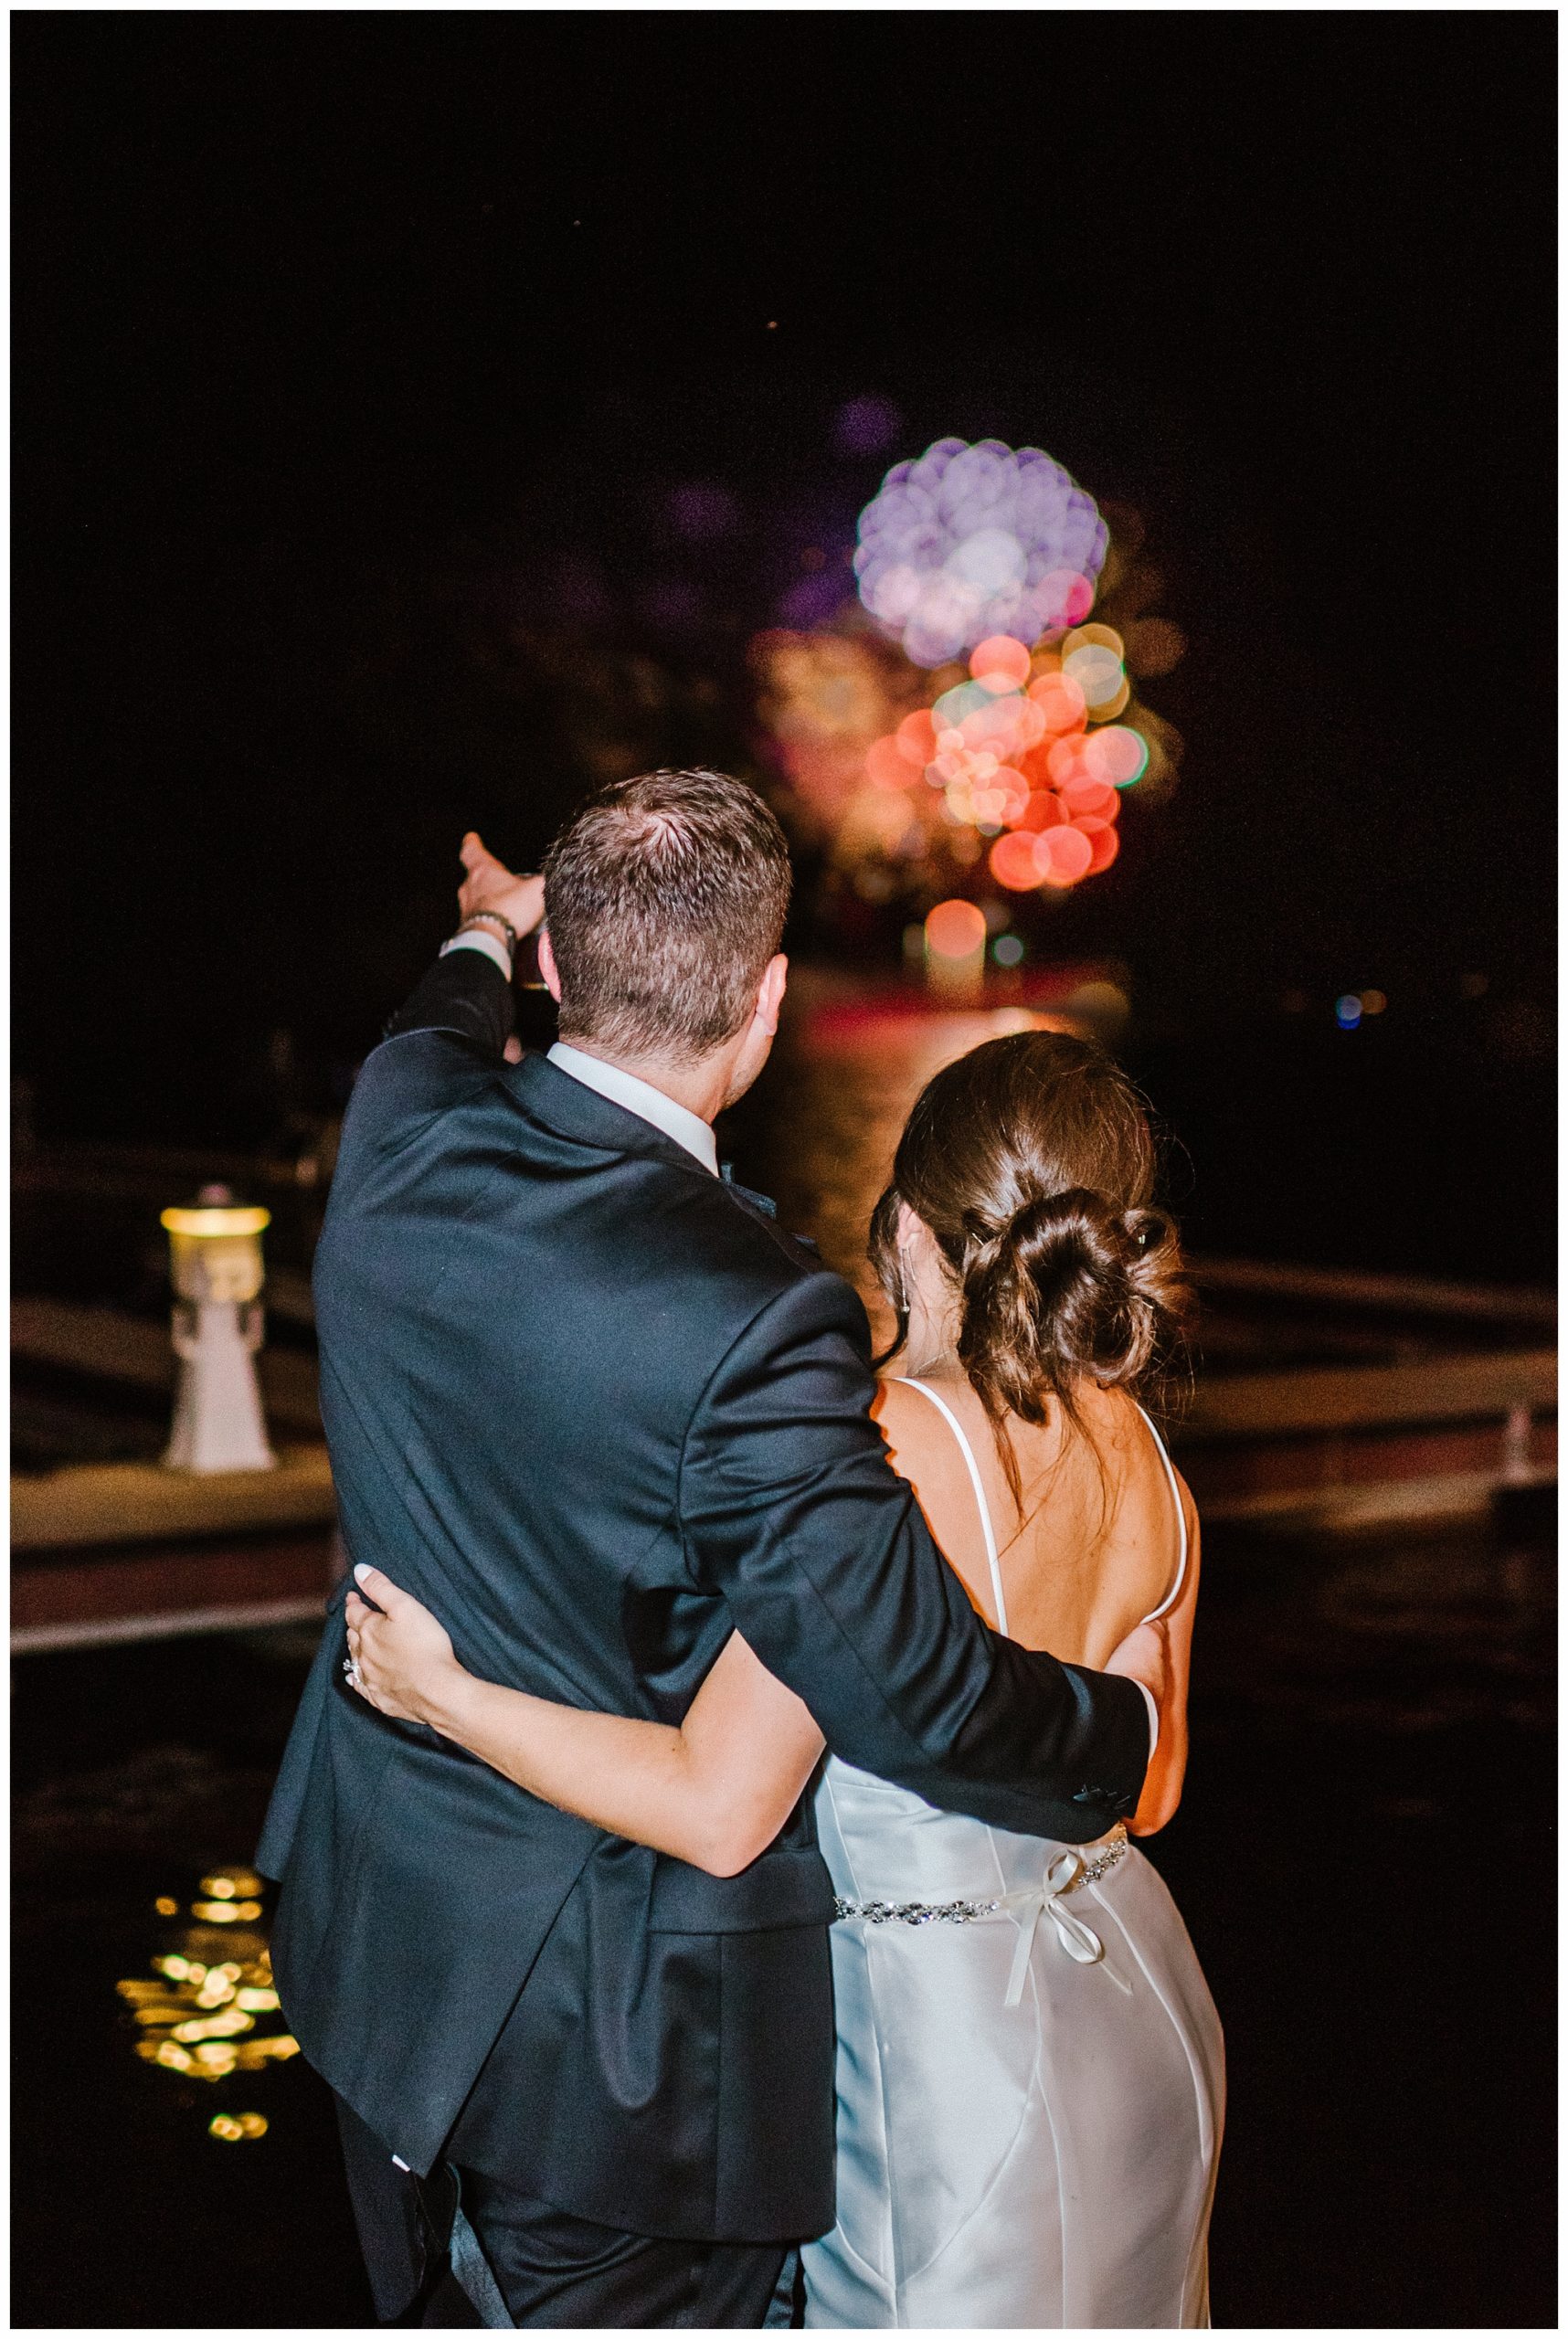 Wedding Exit with Fireworks